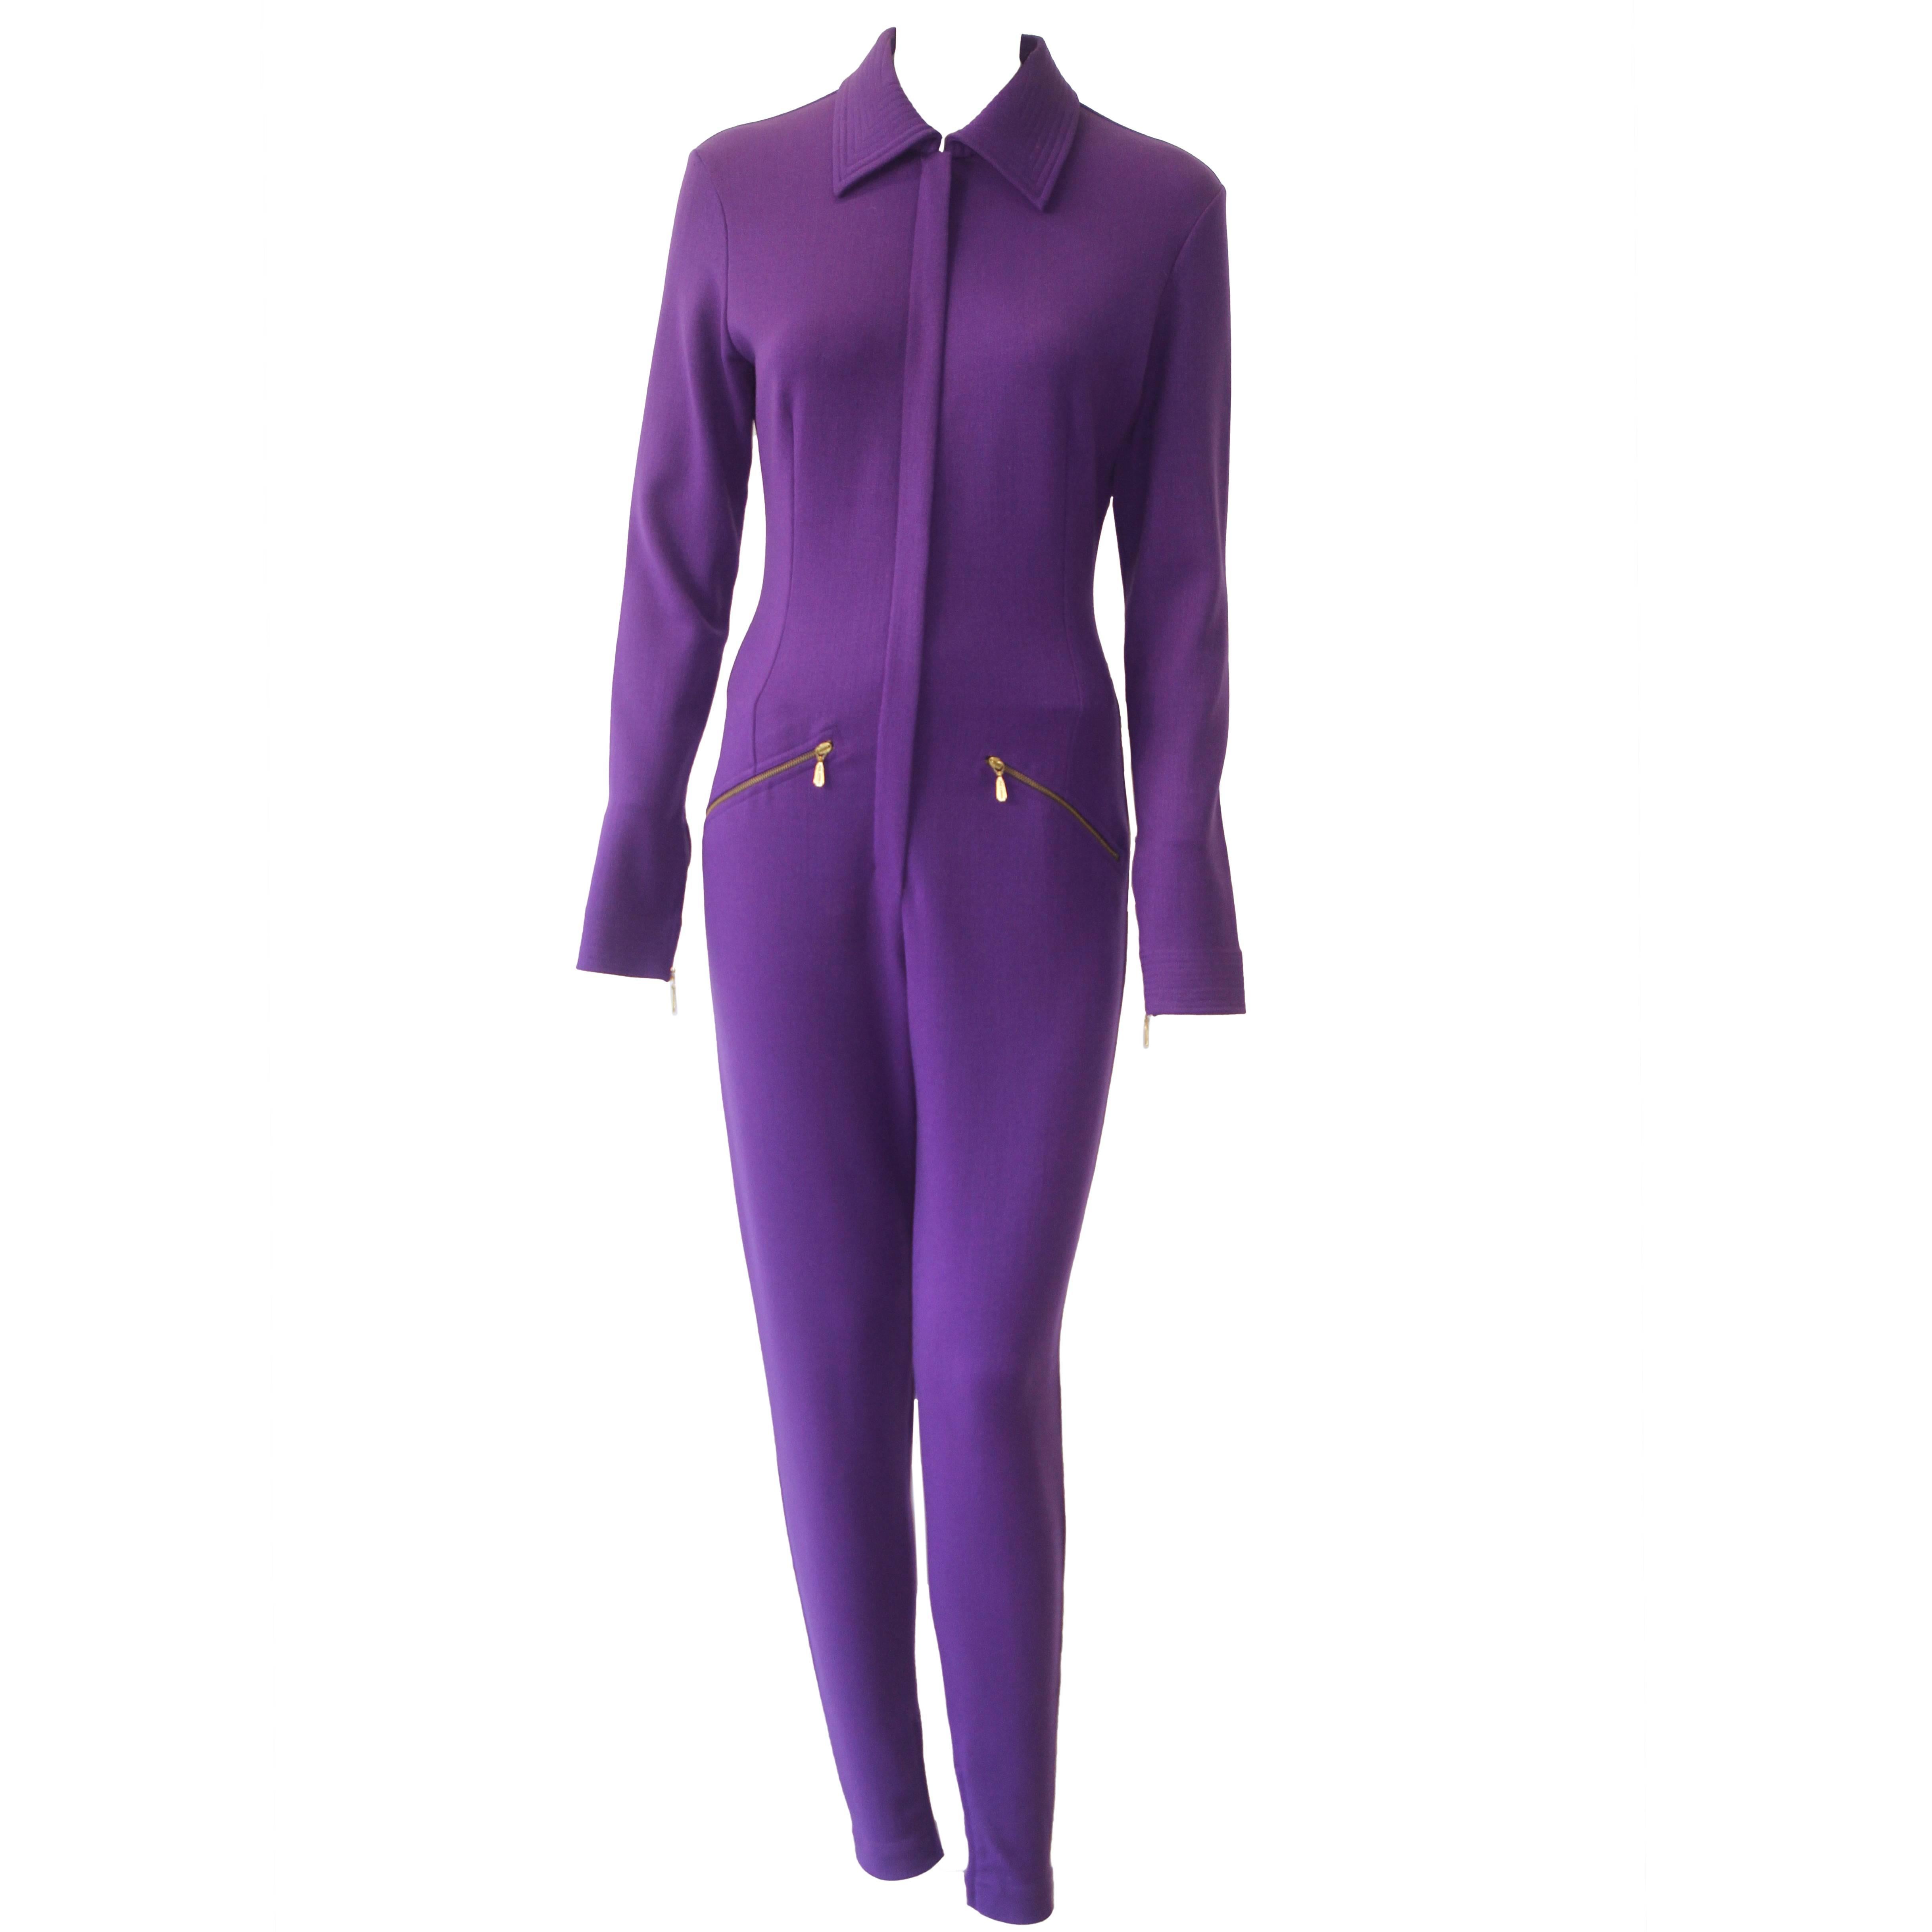 Gianni Versace Sport Zip Stretch Jumpsuit Fall 1991 For Sale